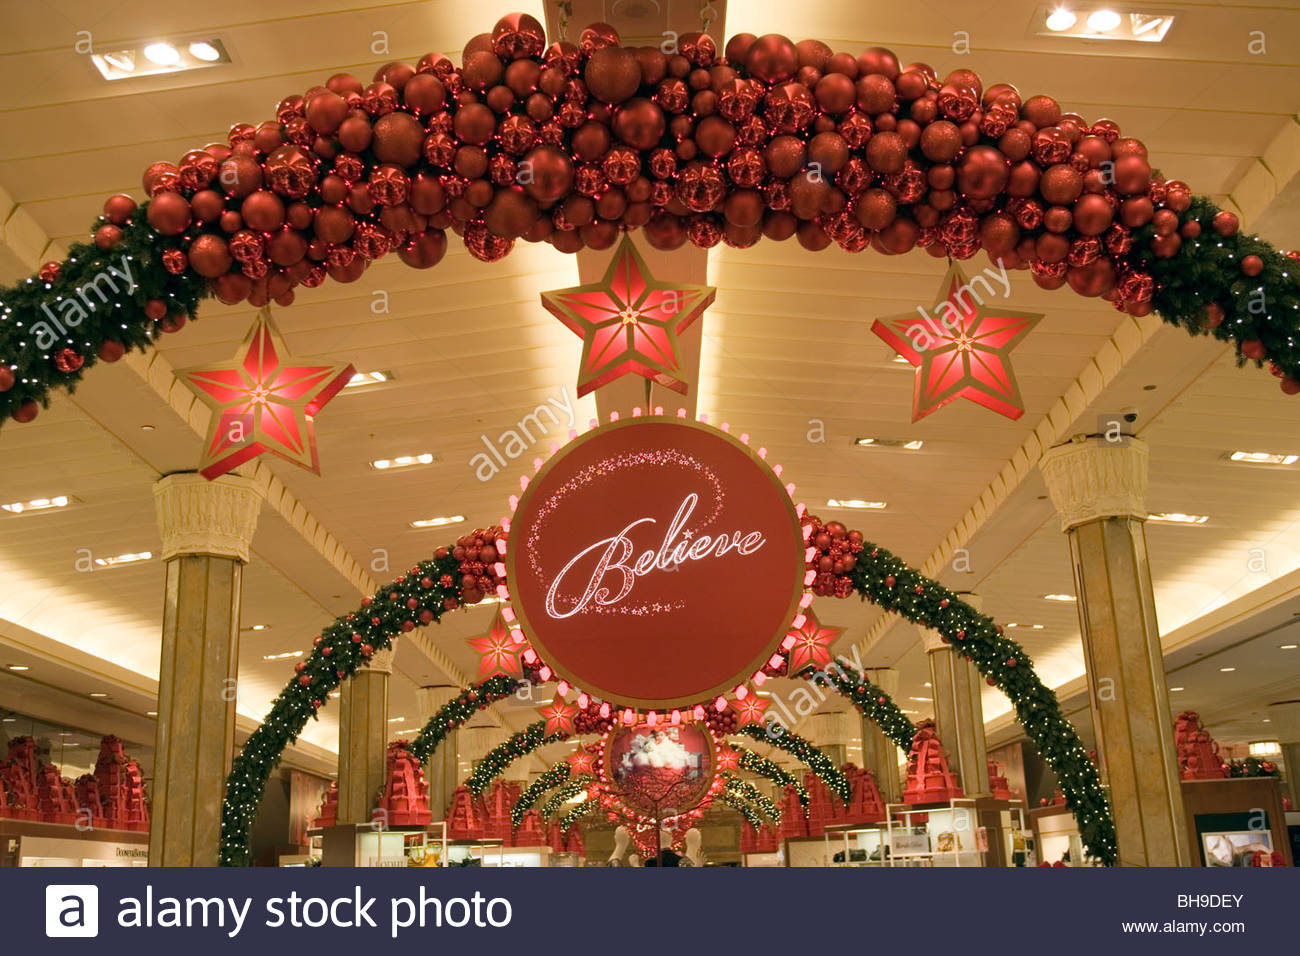 The Macy's Christmas Believe store decorations Stock Photo ...